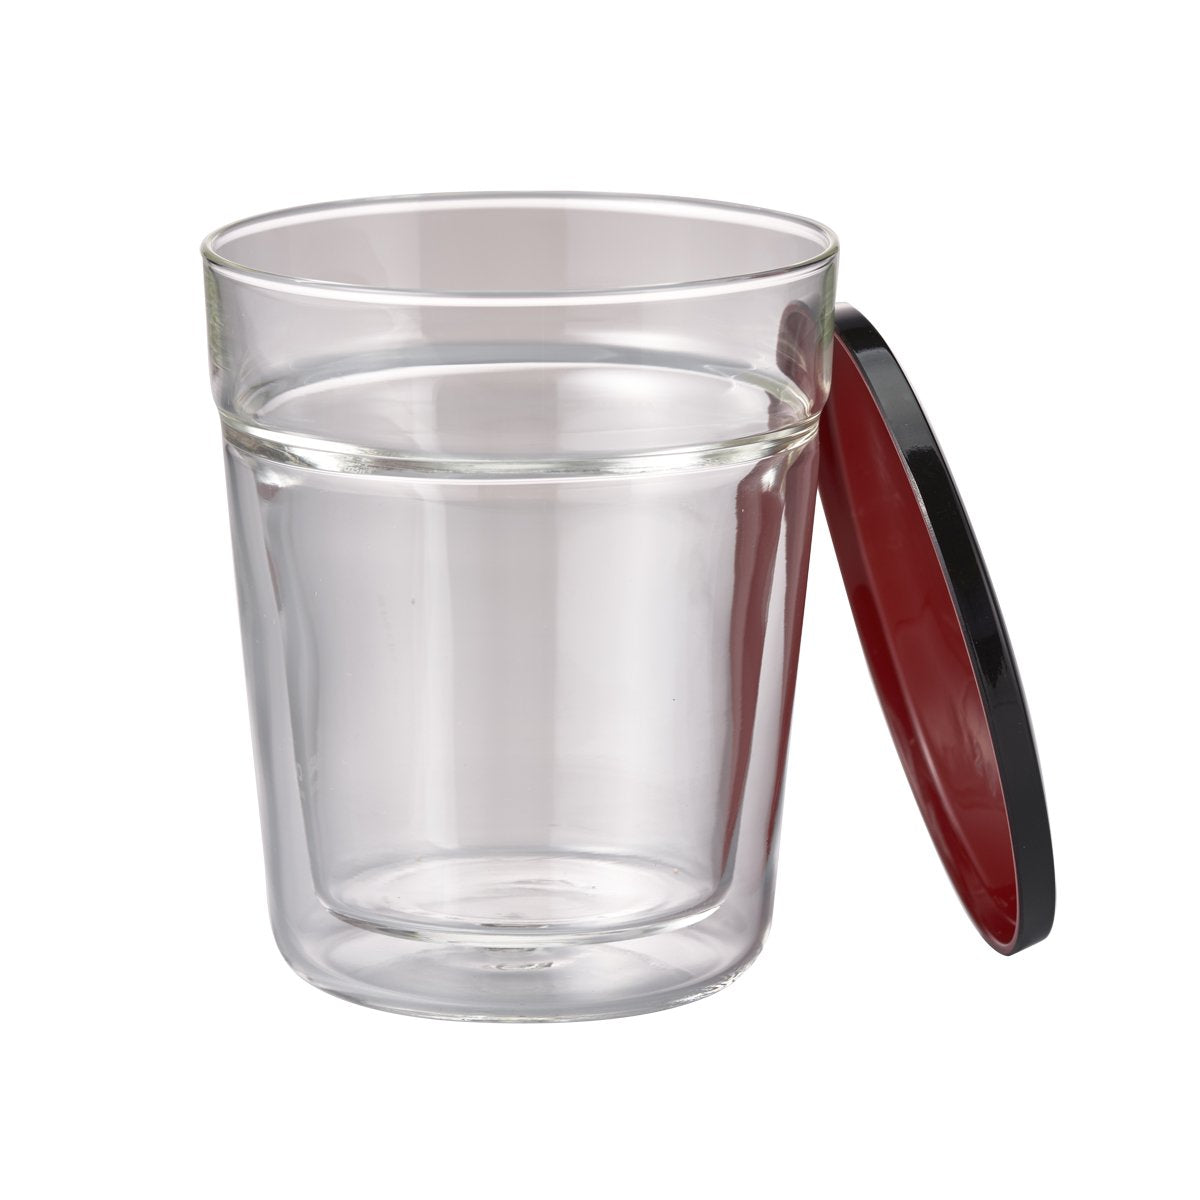 Hario Glass Sake Cup 1 Cup GHK-180